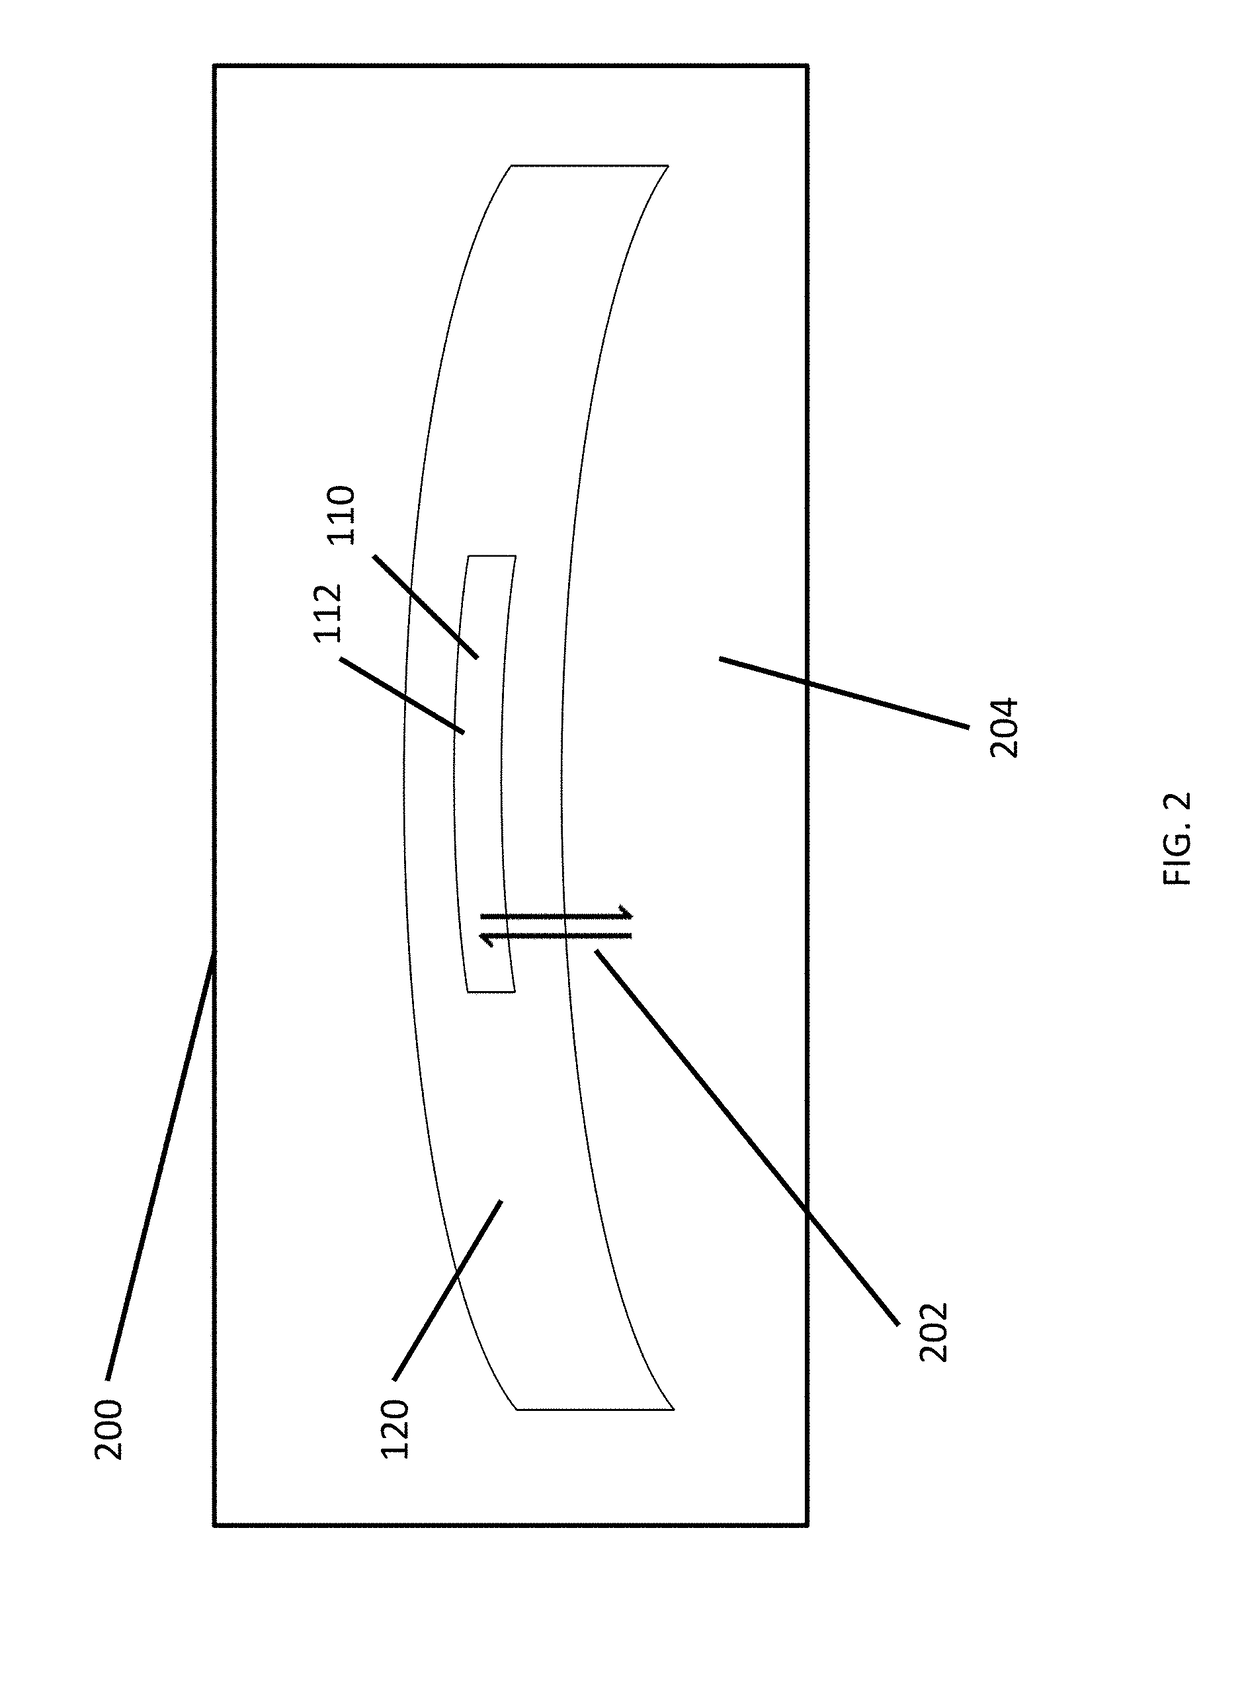 Accommodating lens with cavity